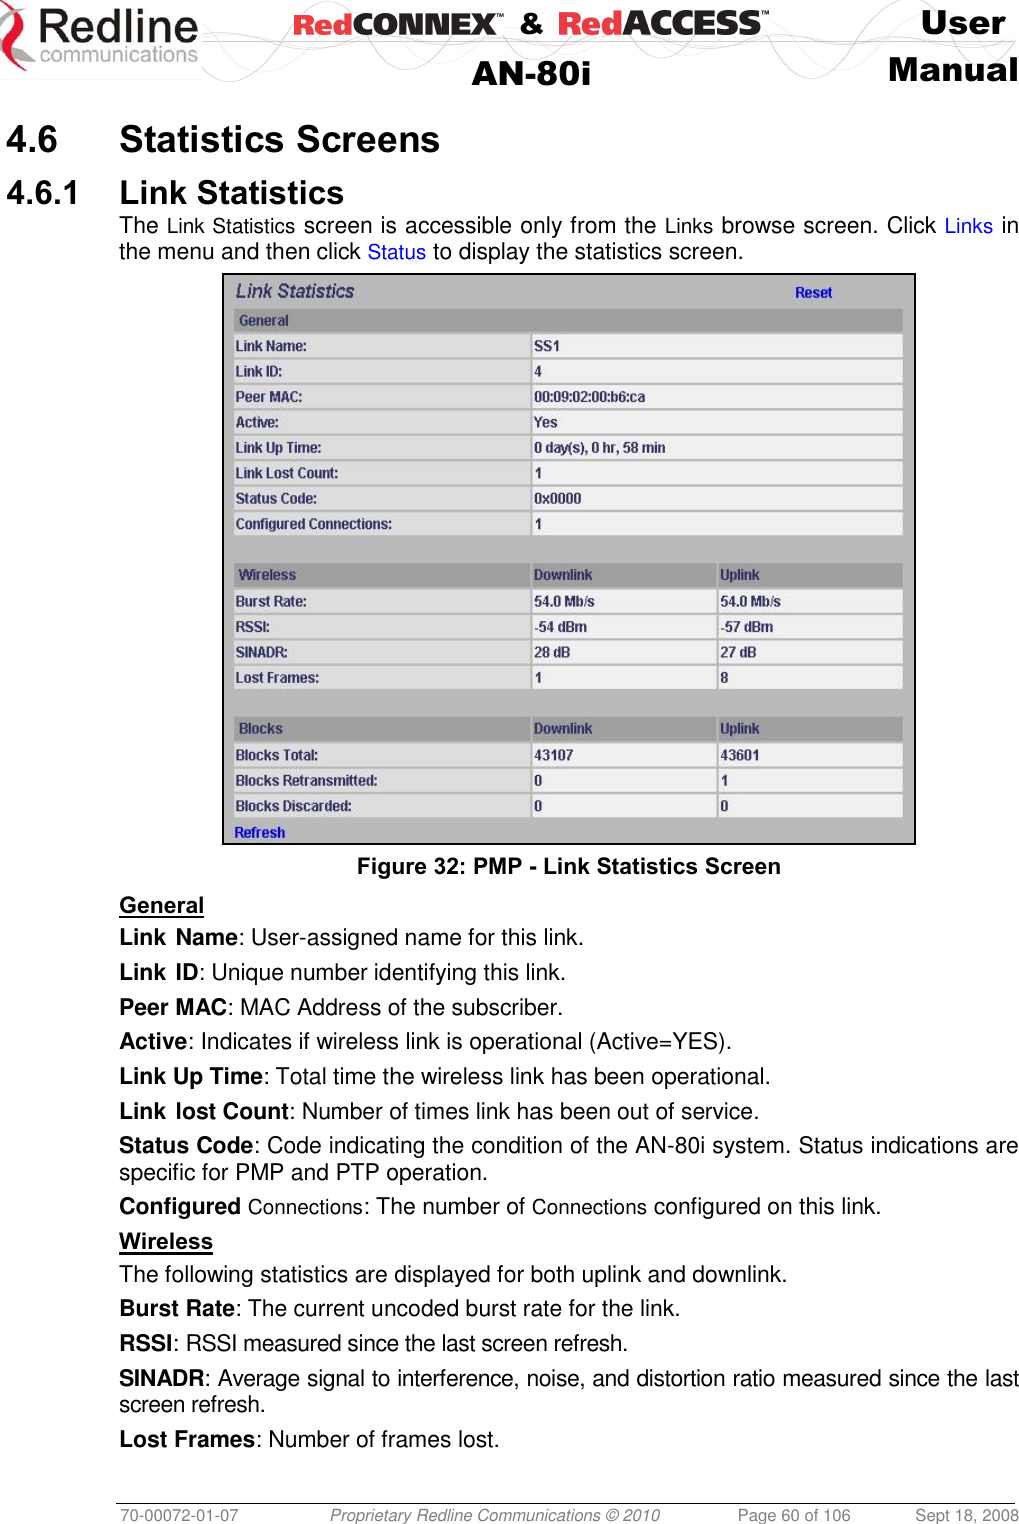    &amp;  User  AN-80i Manual  70-00072-01-07 Proprietary Redline Communications © 2010  Page 60 of 106  Sept 18, 2008  4.6 Statistics Screens 4.6.1 Link Statistics The Link Statistics screen is accessible only from the Links browse screen. Click Links in the menu and then click Status to display the statistics screen.   Figure 32: PMP - Link Statistics Screen General Link Name: User-assigned name for this link. Link ID: Unique number identifying this link. Peer MAC: MAC Address of the subscriber. Active: Indicates if wireless link is operational (Active=YES). Link Up Time: Total time the wireless link has been operational. Link lost Count: Number of times link has been out of service. Status Code: Code indicating the condition of the AN-80i system. Status indications are specific for PMP and PTP operation.  Configured Connections: The number of Connections configured on this link. Wireless The following statistics are displayed for both uplink and downlink. Burst Rate: The current uncoded burst rate for the link. RSSI: RSSI measured since the last screen refresh. SINADR: Average signal to interference, noise, and distortion ratio measured since the last screen refresh. Lost Frames: Number of frames lost. 